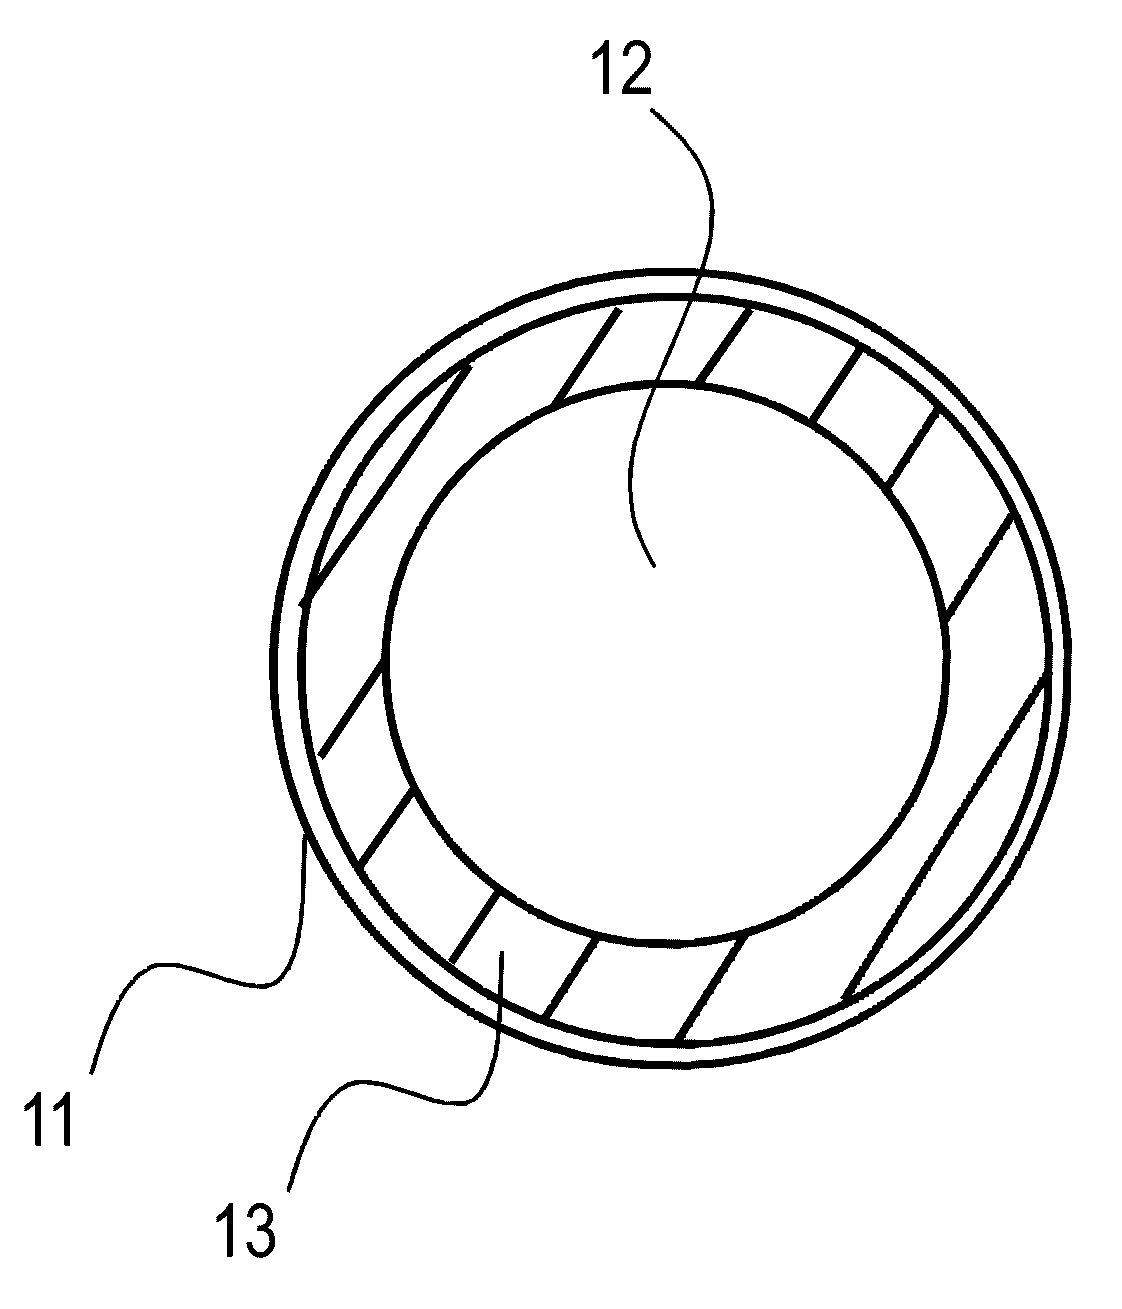 Electroconductive member with a surface layer including a porous body having a continuous open pore